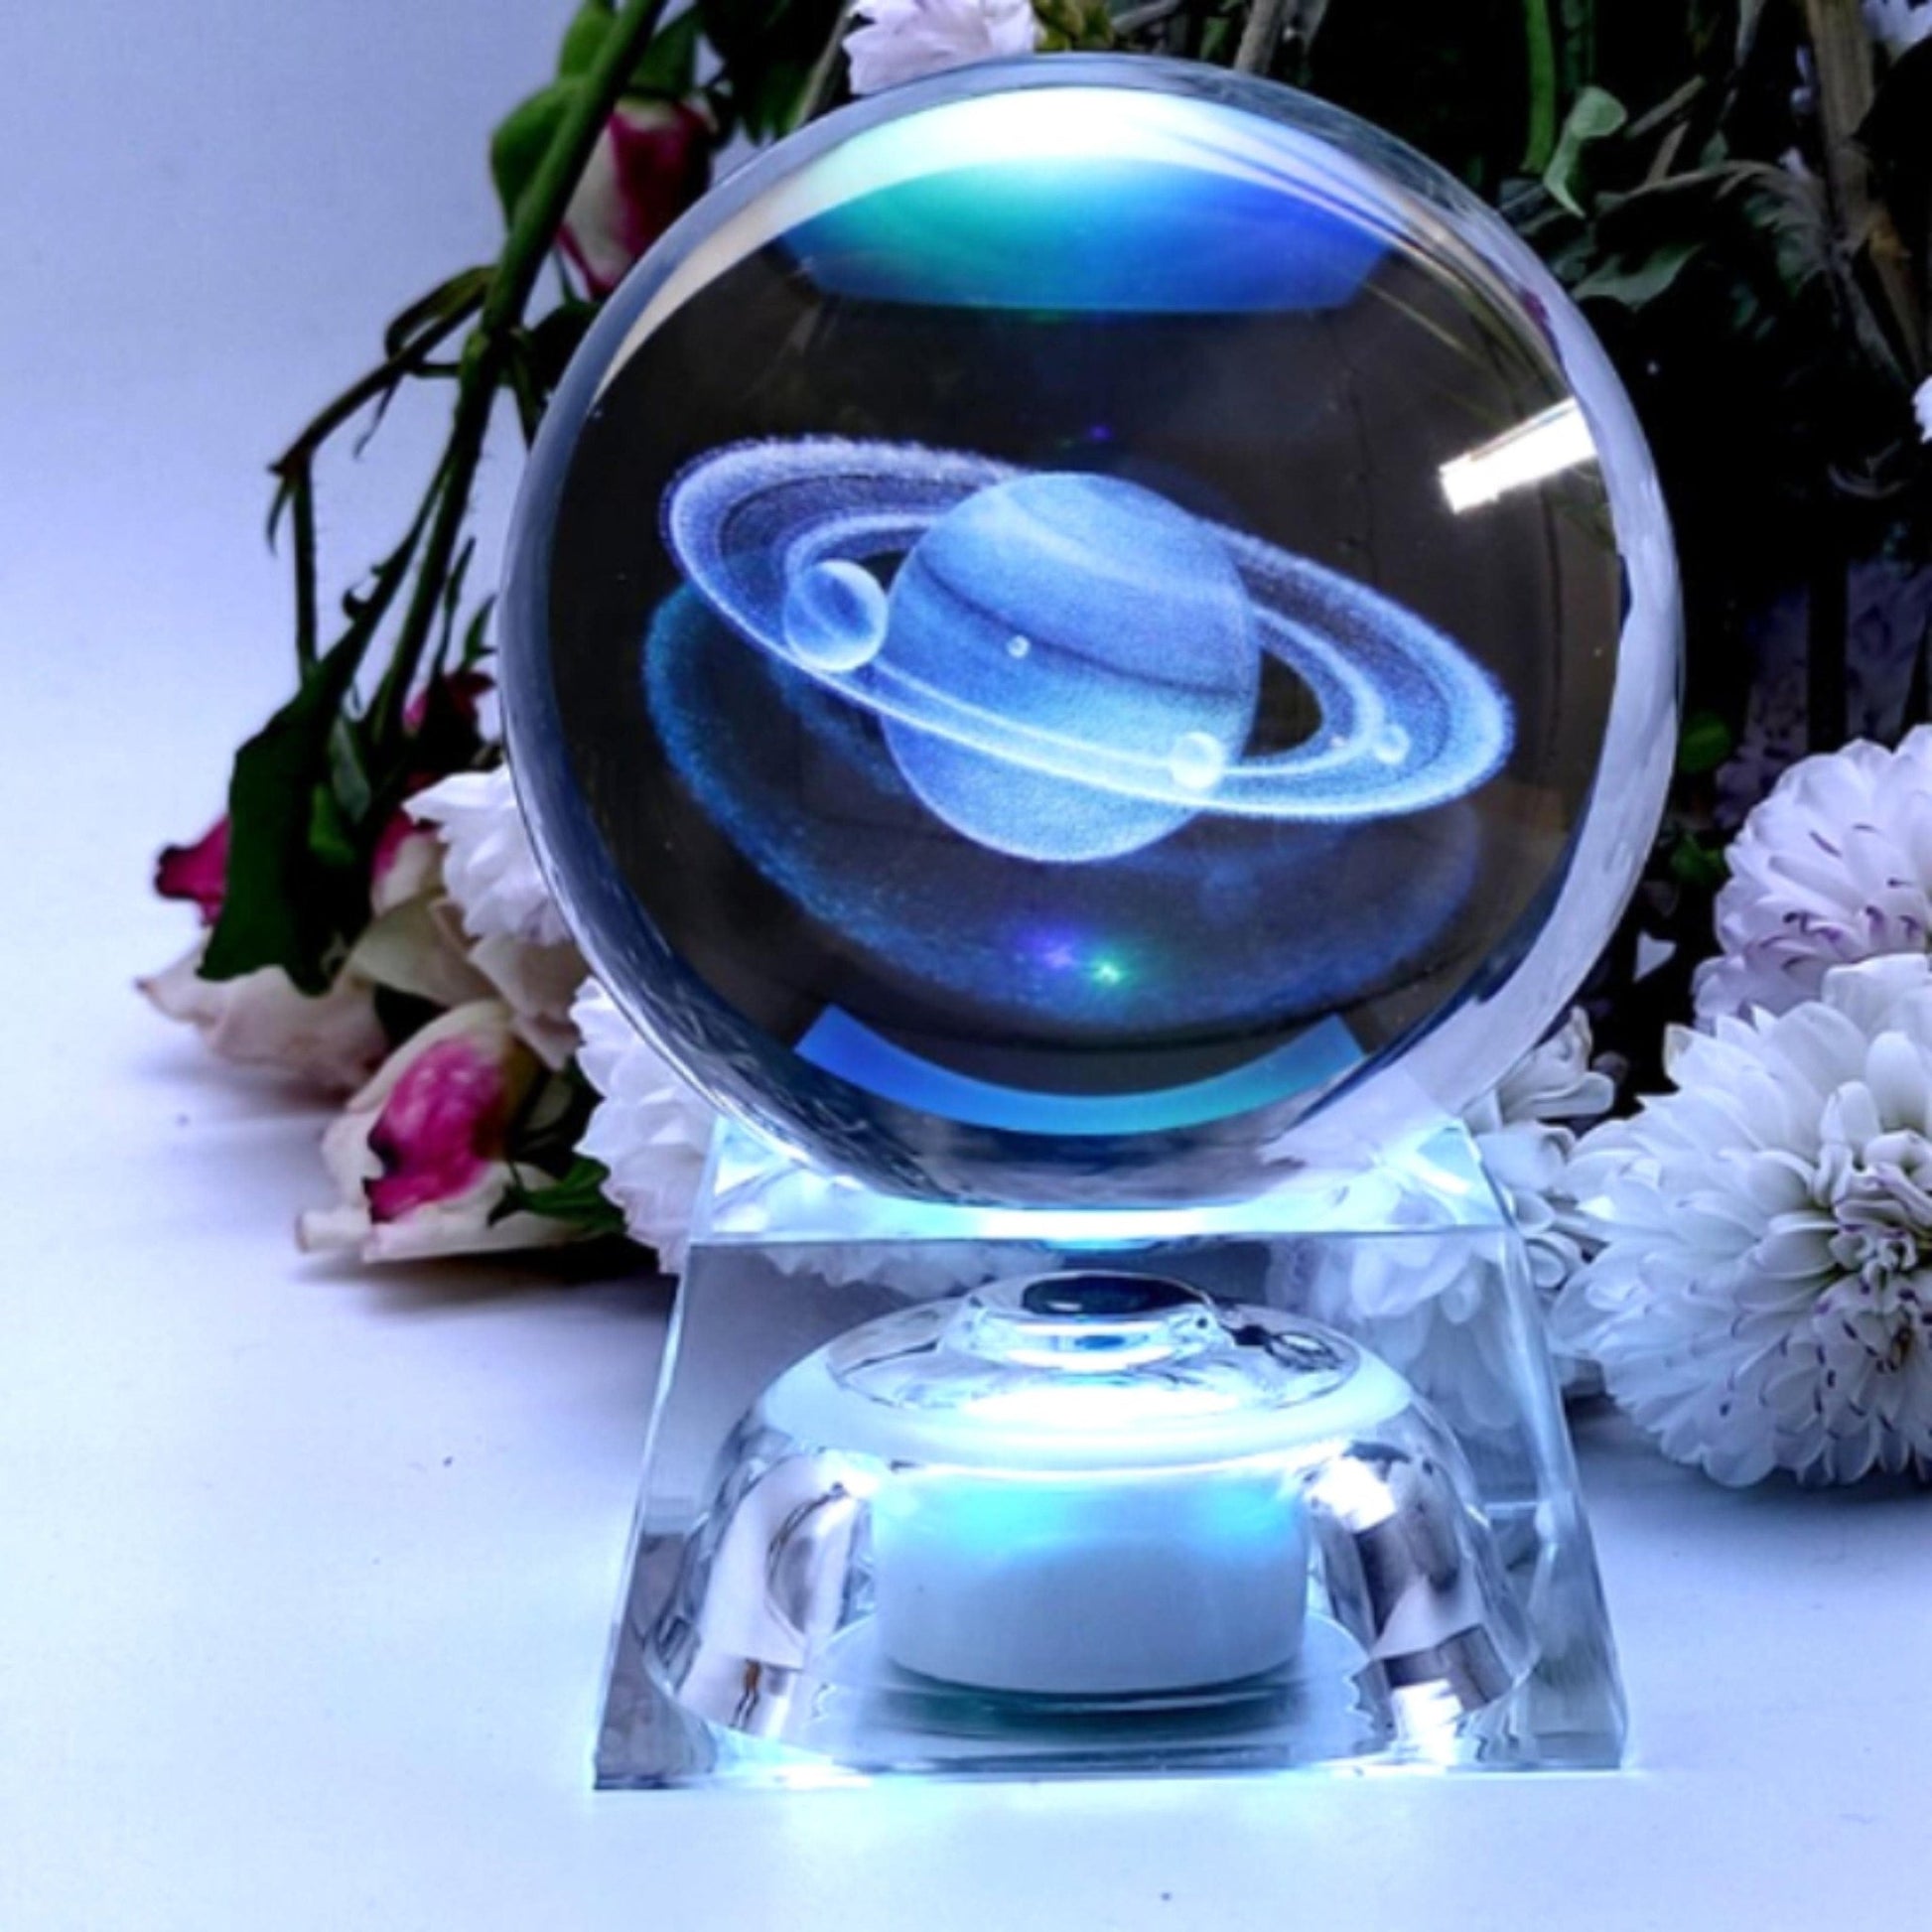 Crystal Saturn Globe - Space Mesmerise - Space Gifts | Lamps | Statues | Home Decor